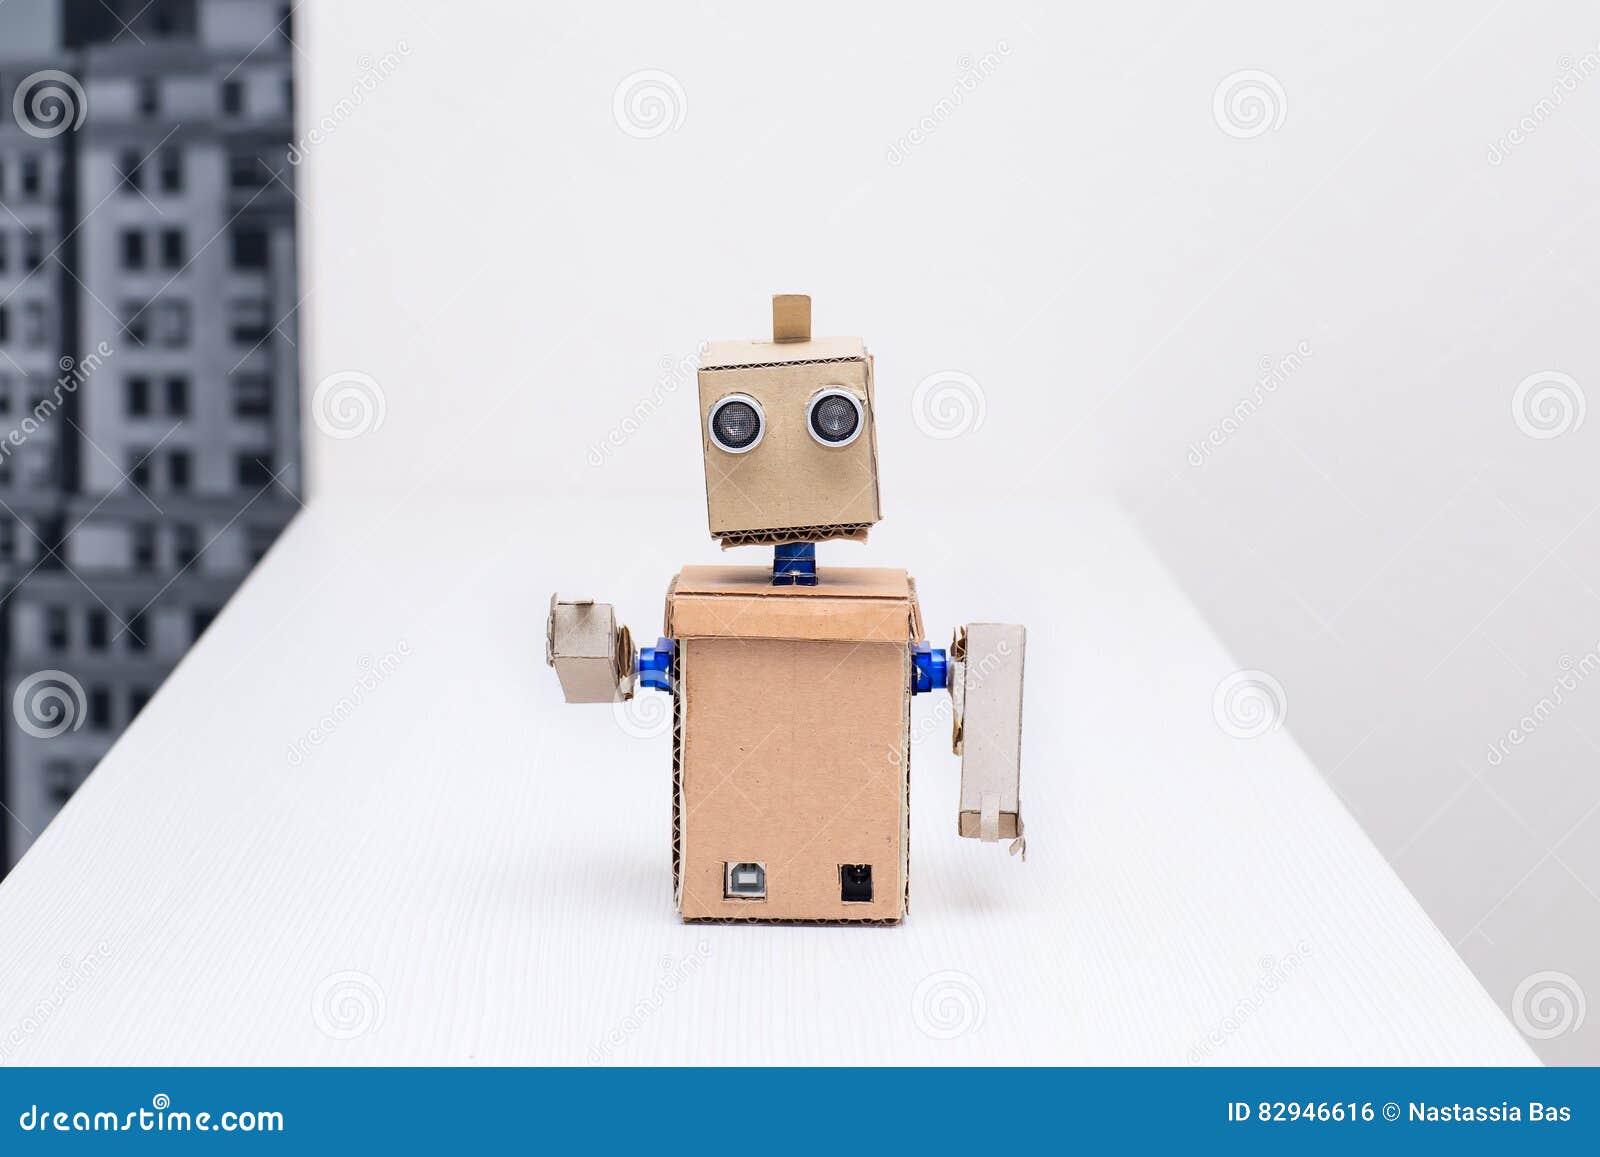 Cardboard Robot Arms on the White Table at Home Stock Photo - Image sample, robot: 82946616